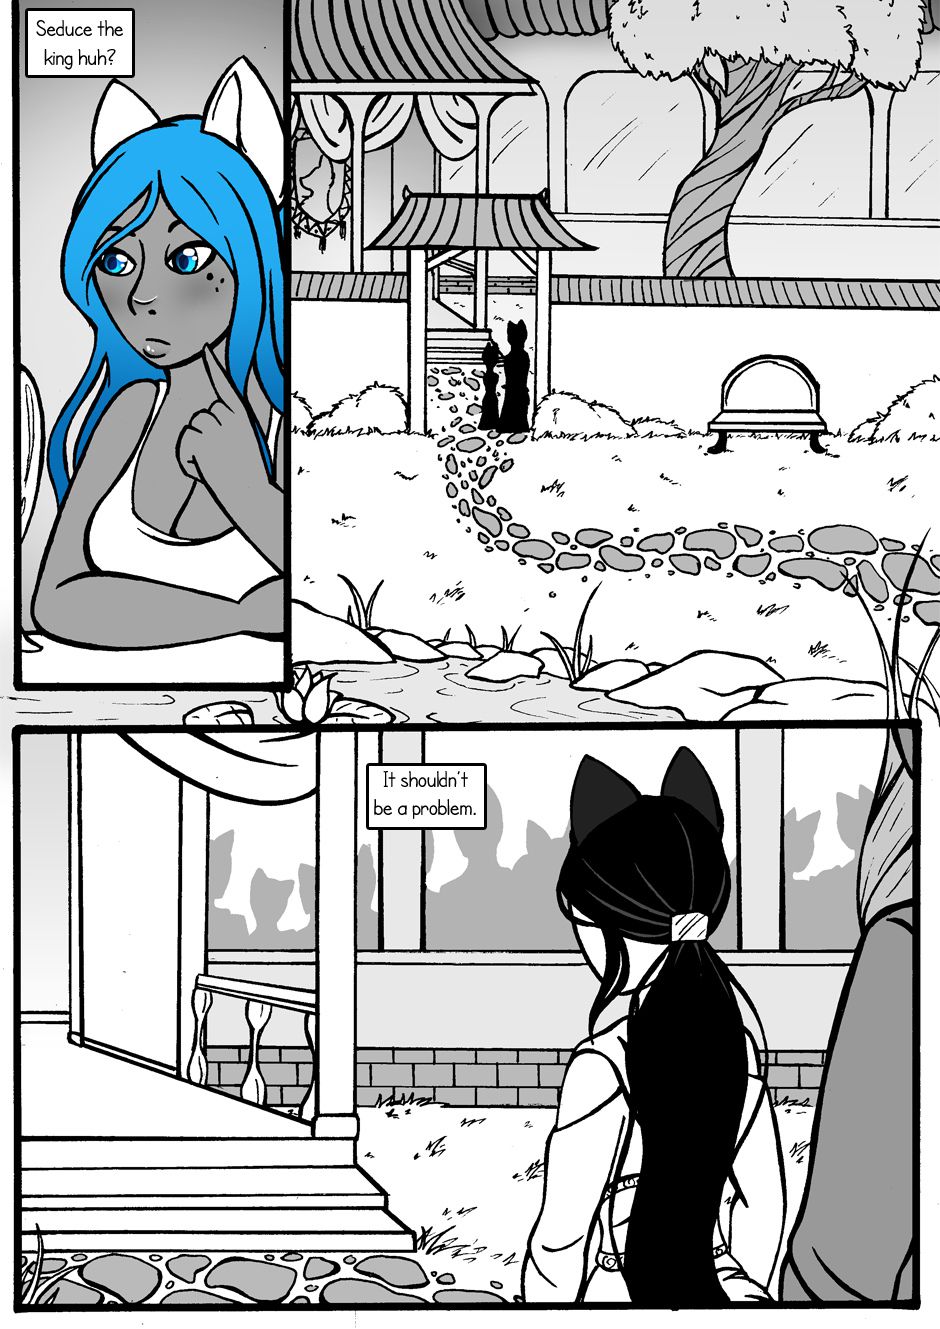 [Jeny-jen94] Between Kings and Queens [Ongoing] 22